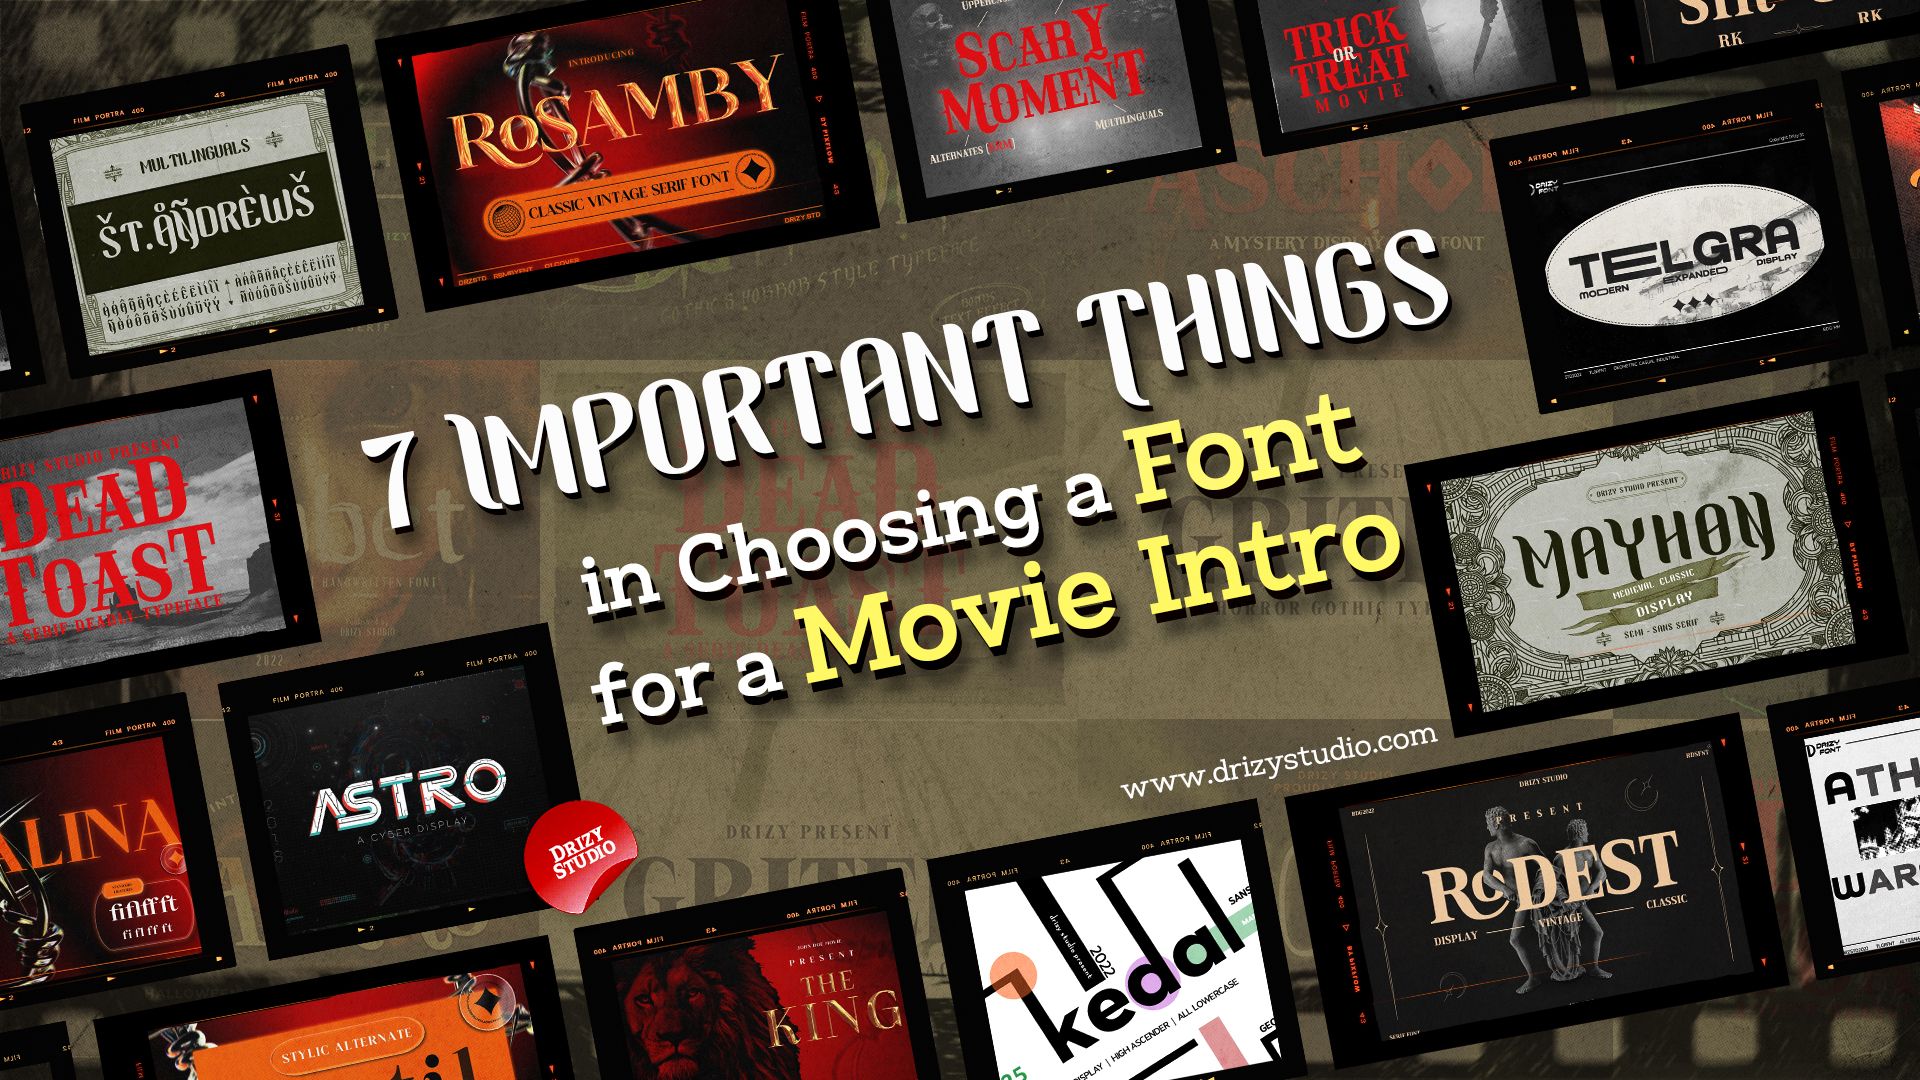 7 Important Things in Choosing a Font for a Movie Intro COVER